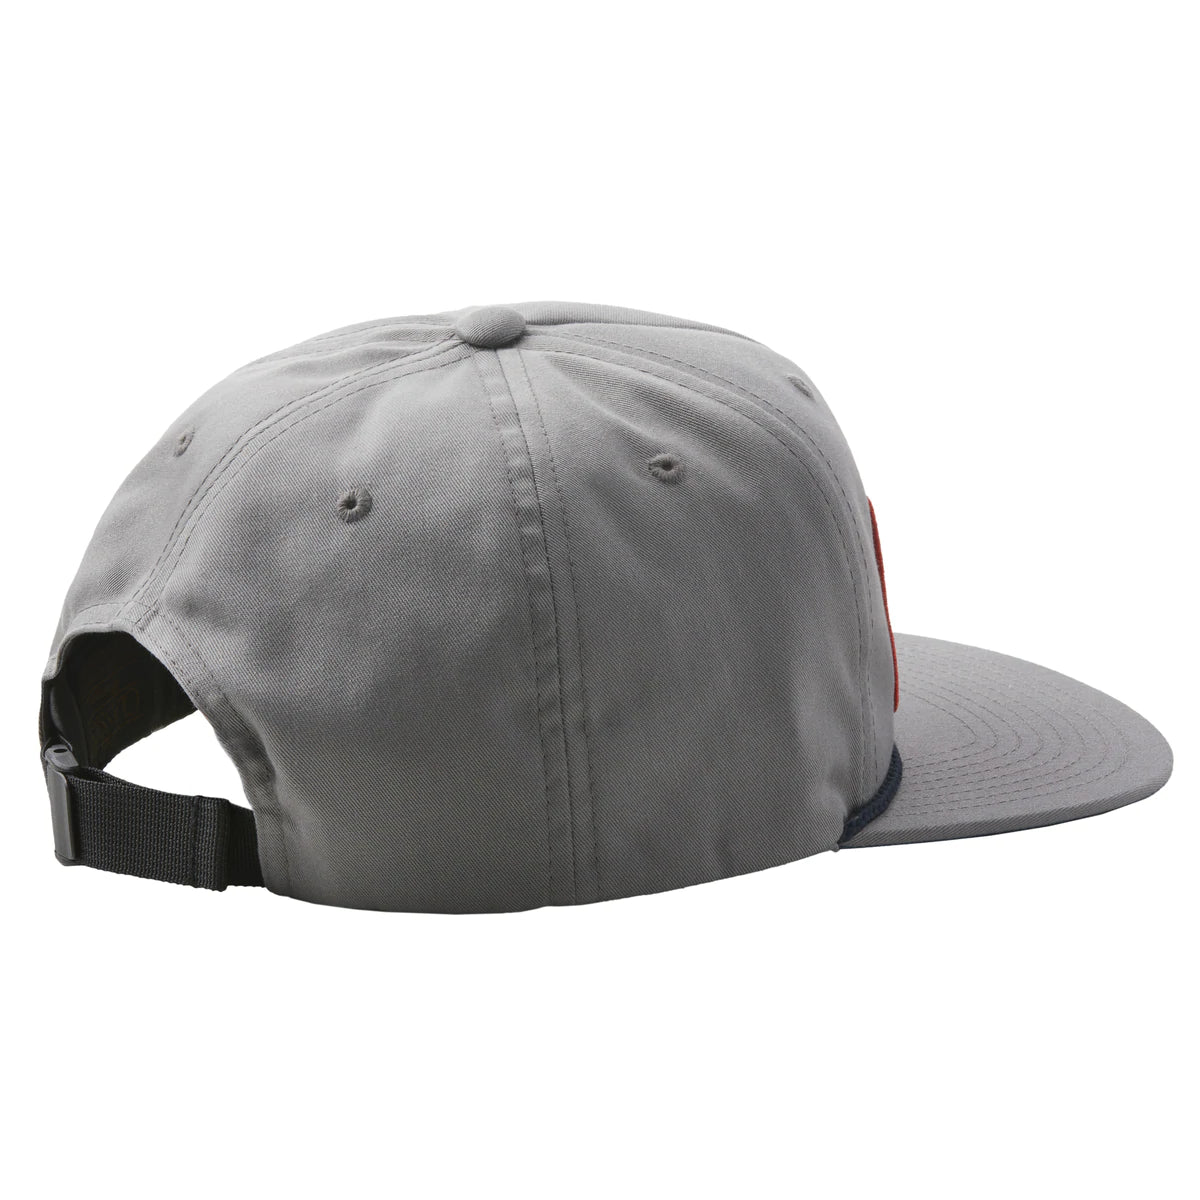 Huk United Unstructured Hat- Overcast Grey